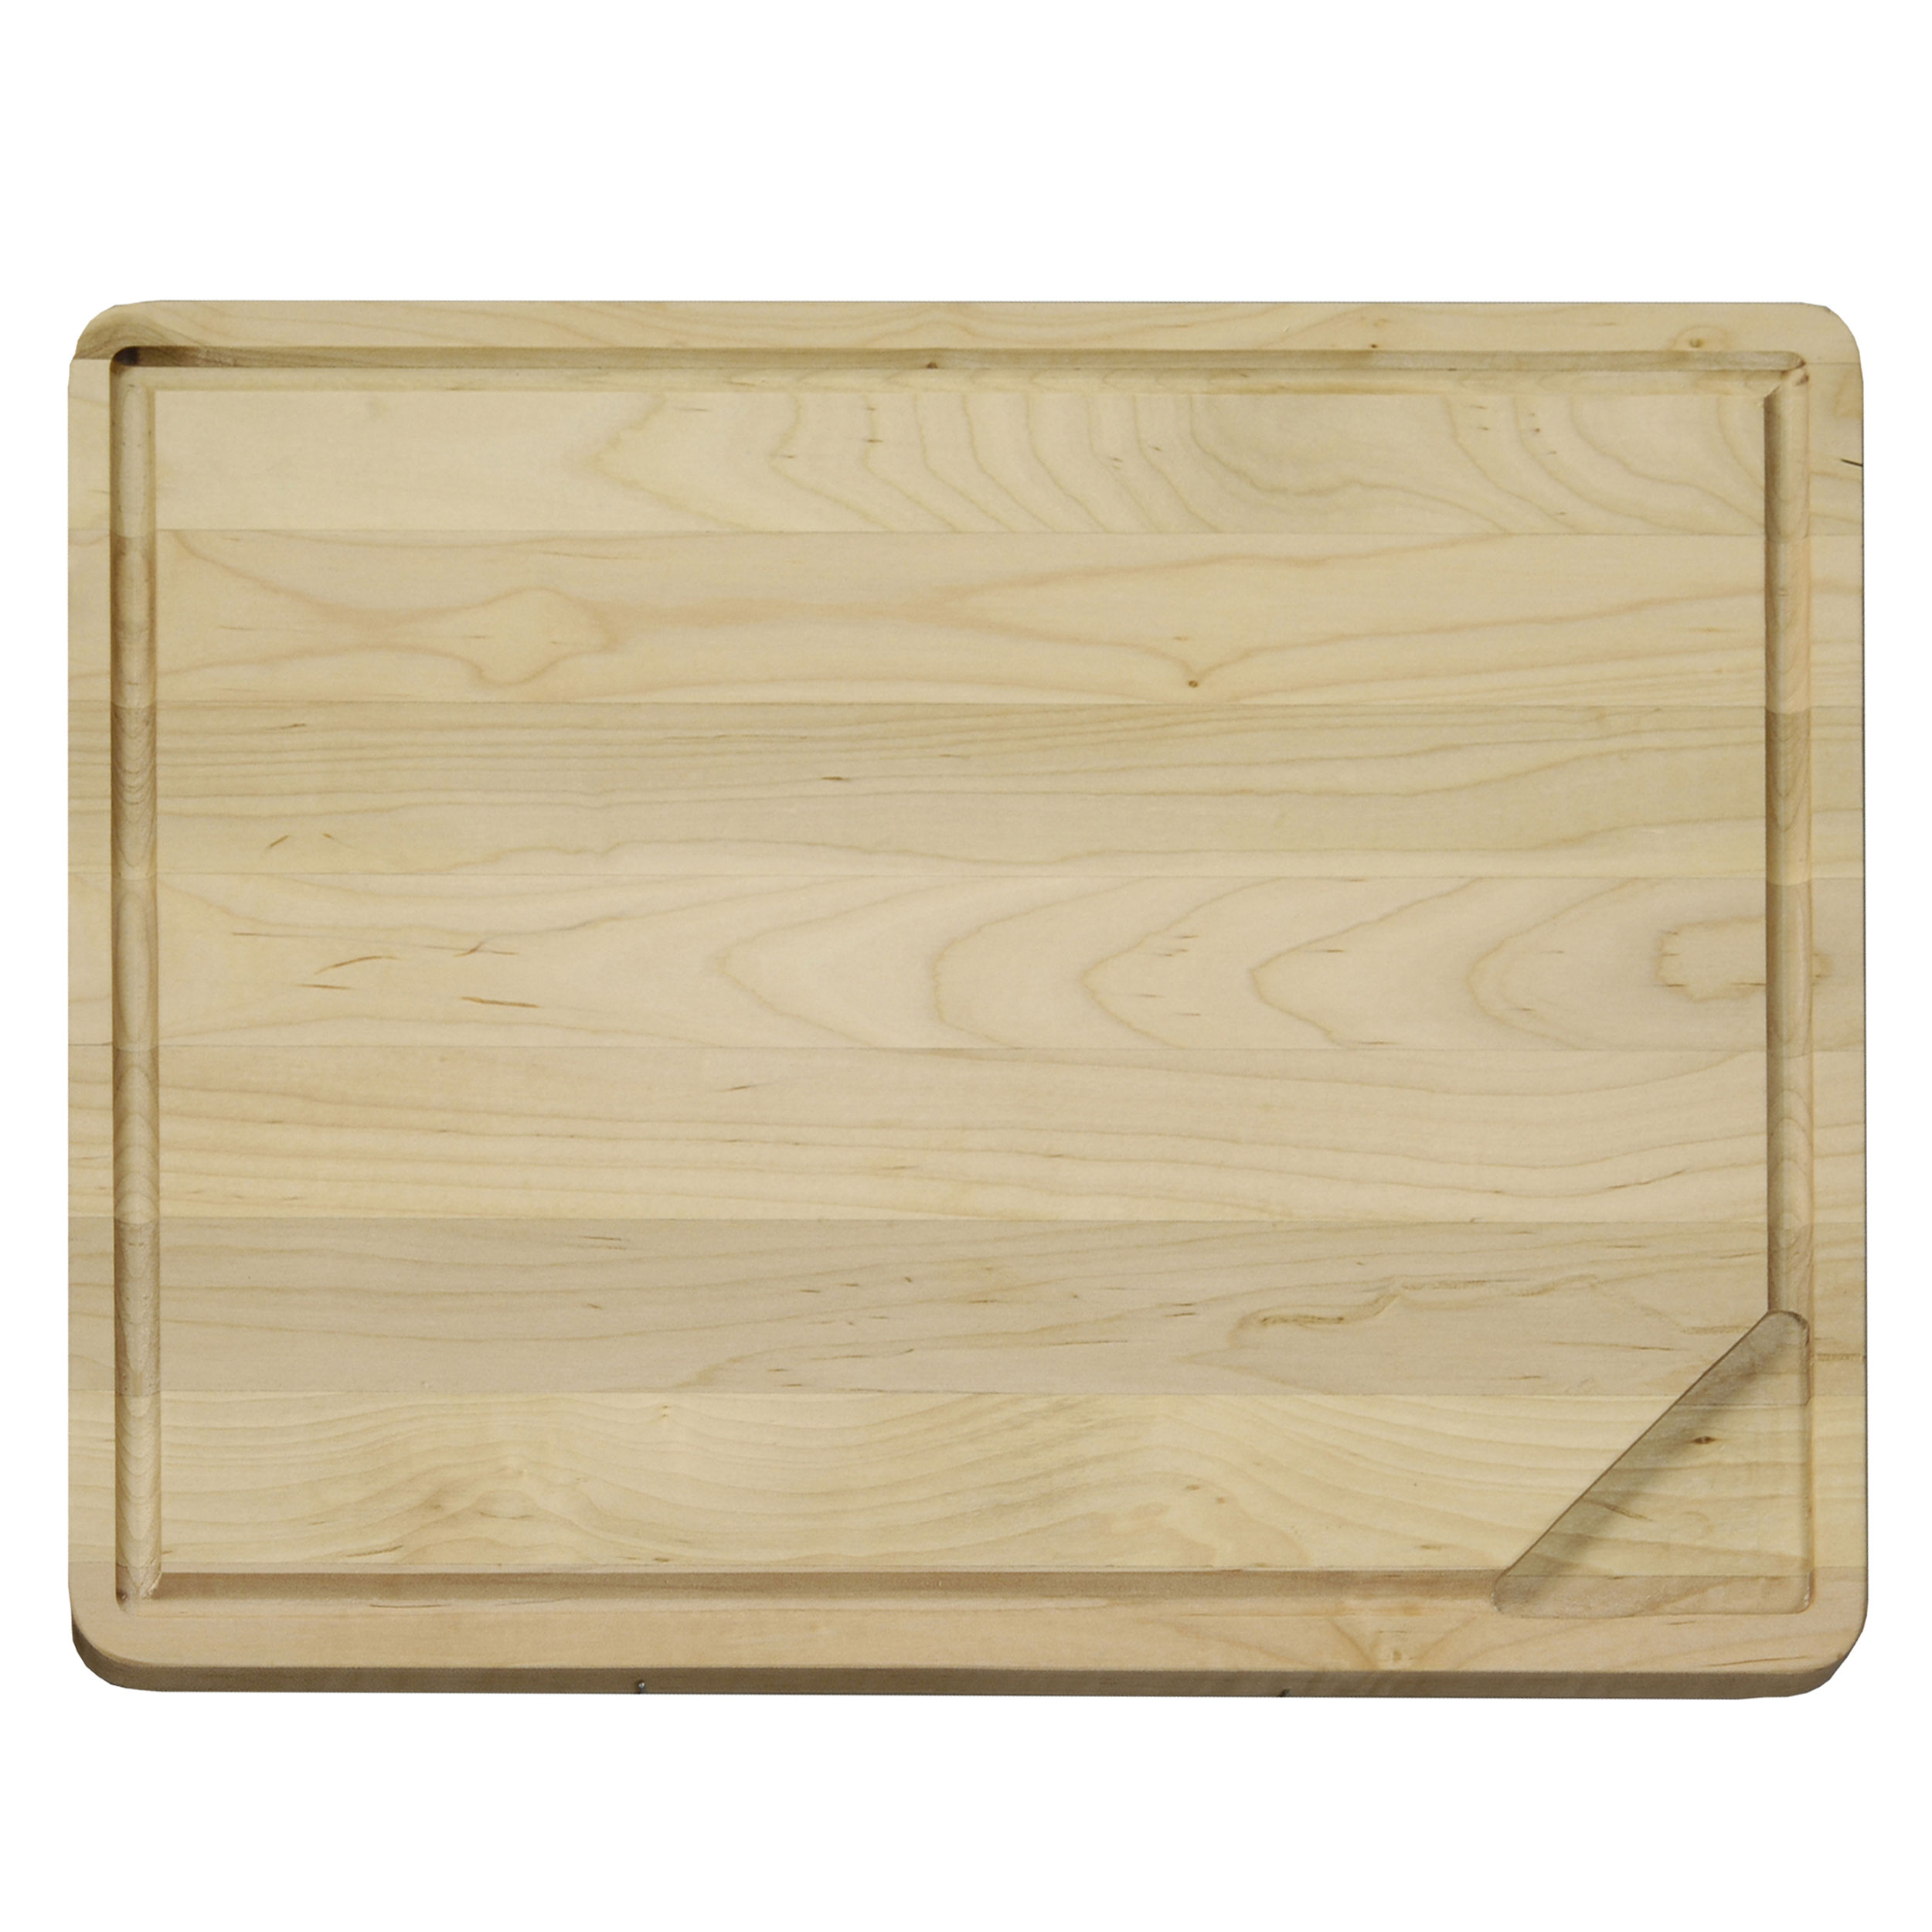 Large 18 X 14 Inch Reversible Hardwood Cutting Board With Gravy Groove & Well